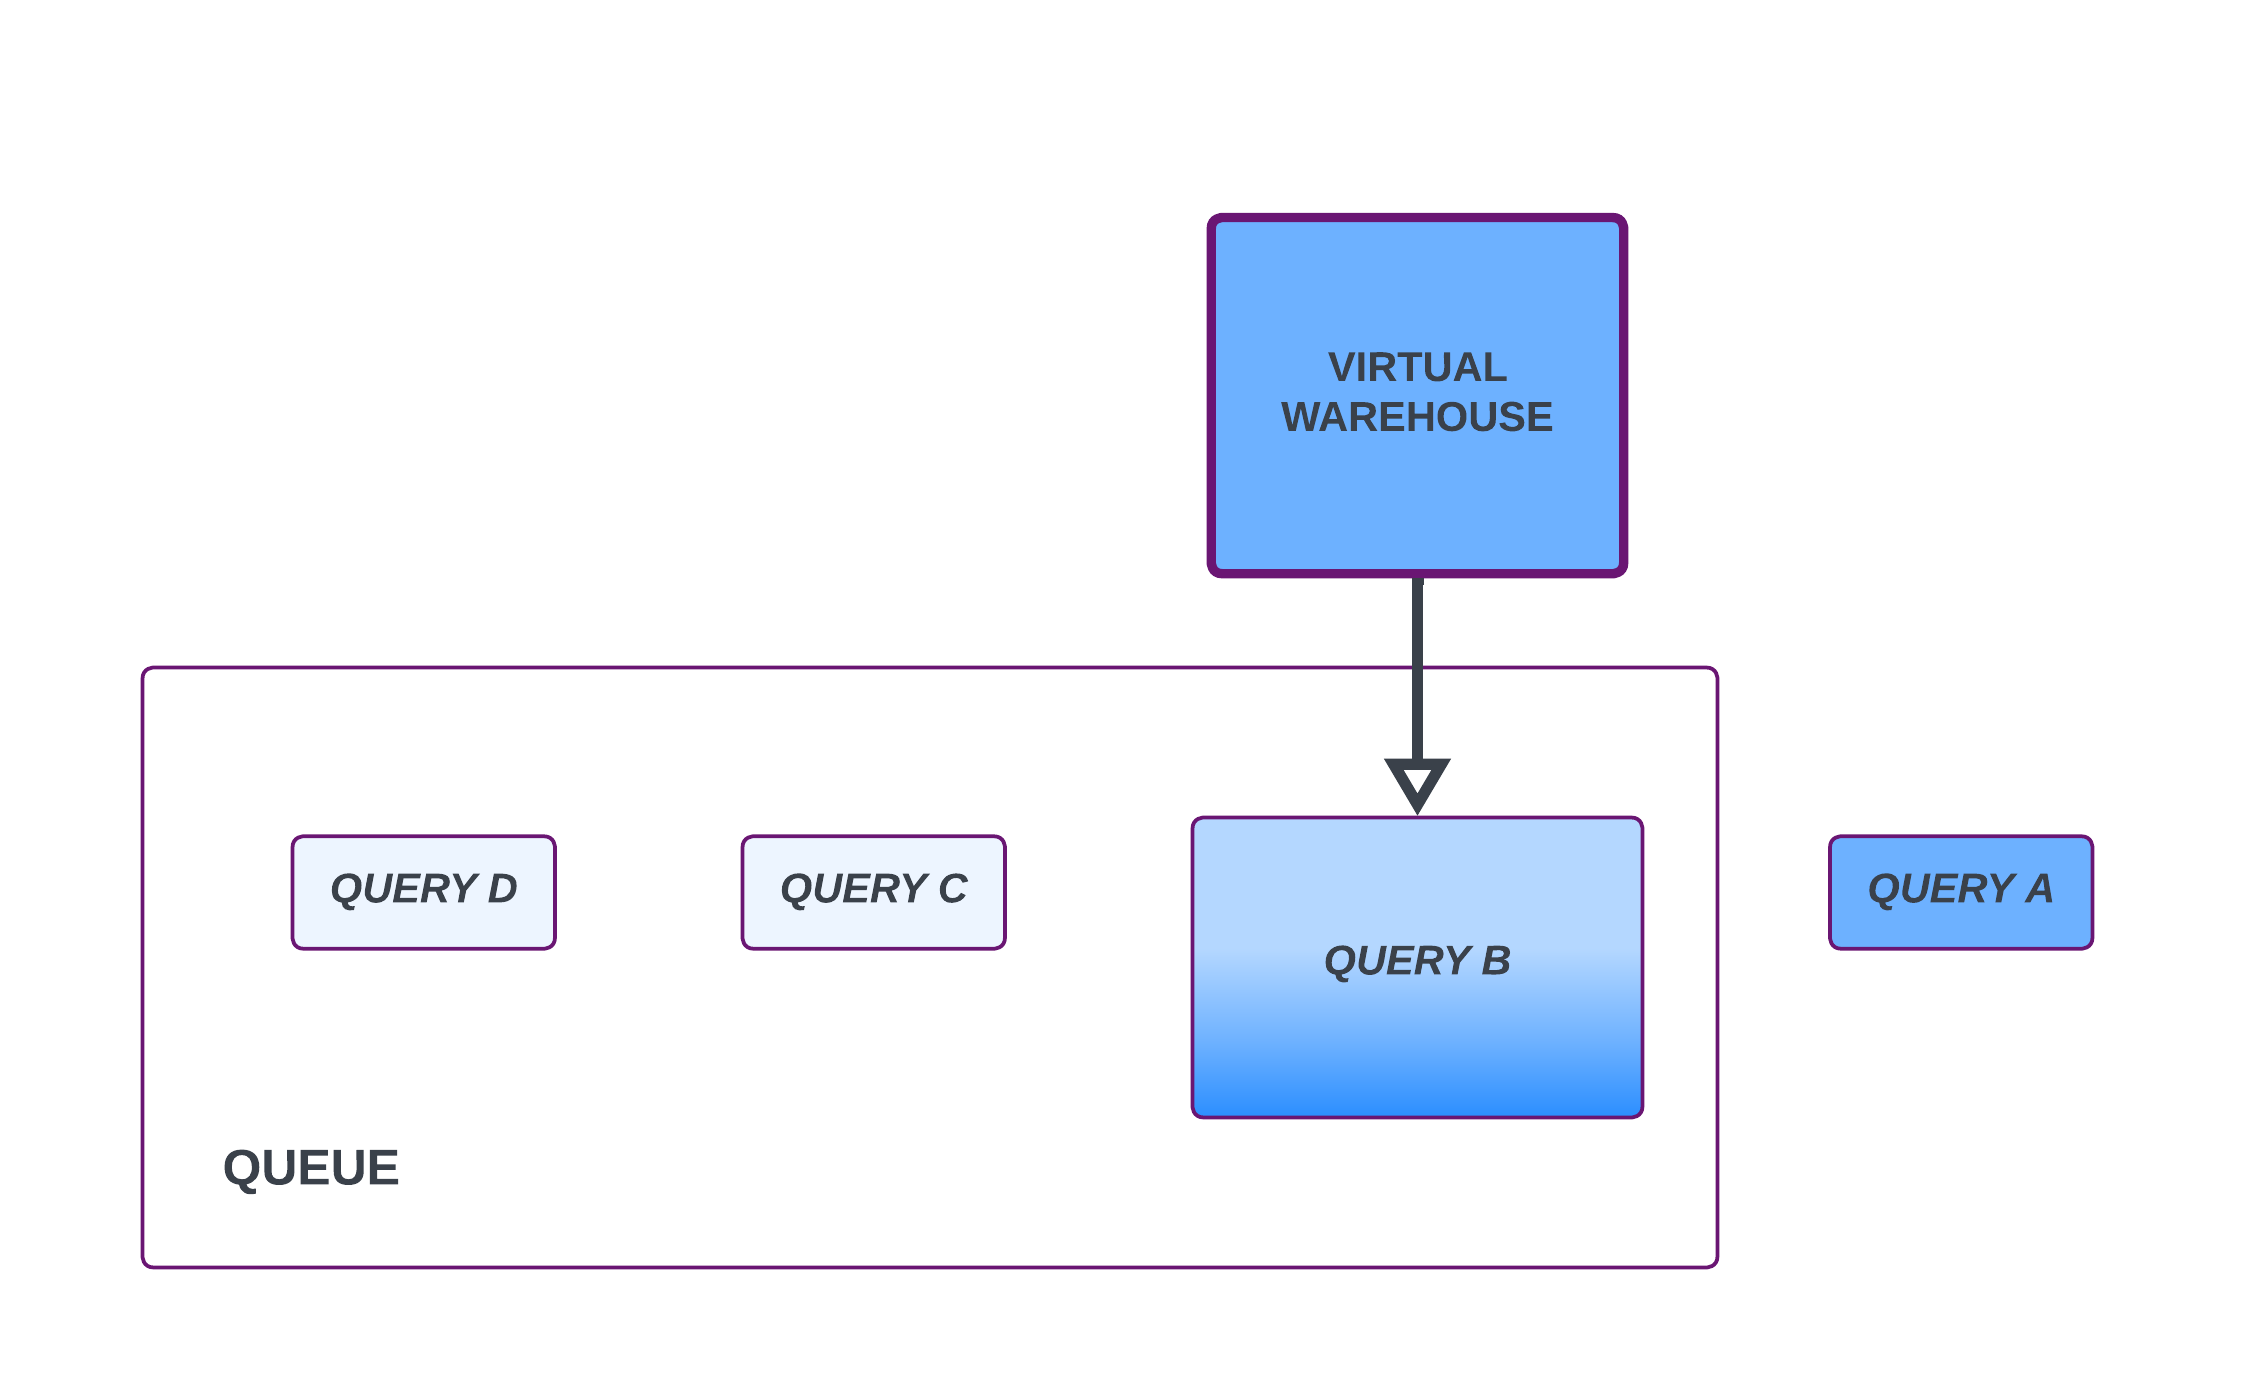 A virtual warehouse is processing queries. Query A is completed. A large query, Query B, is being processed and is holding up the queue. Queries C and D are in the queue behind Query B. 